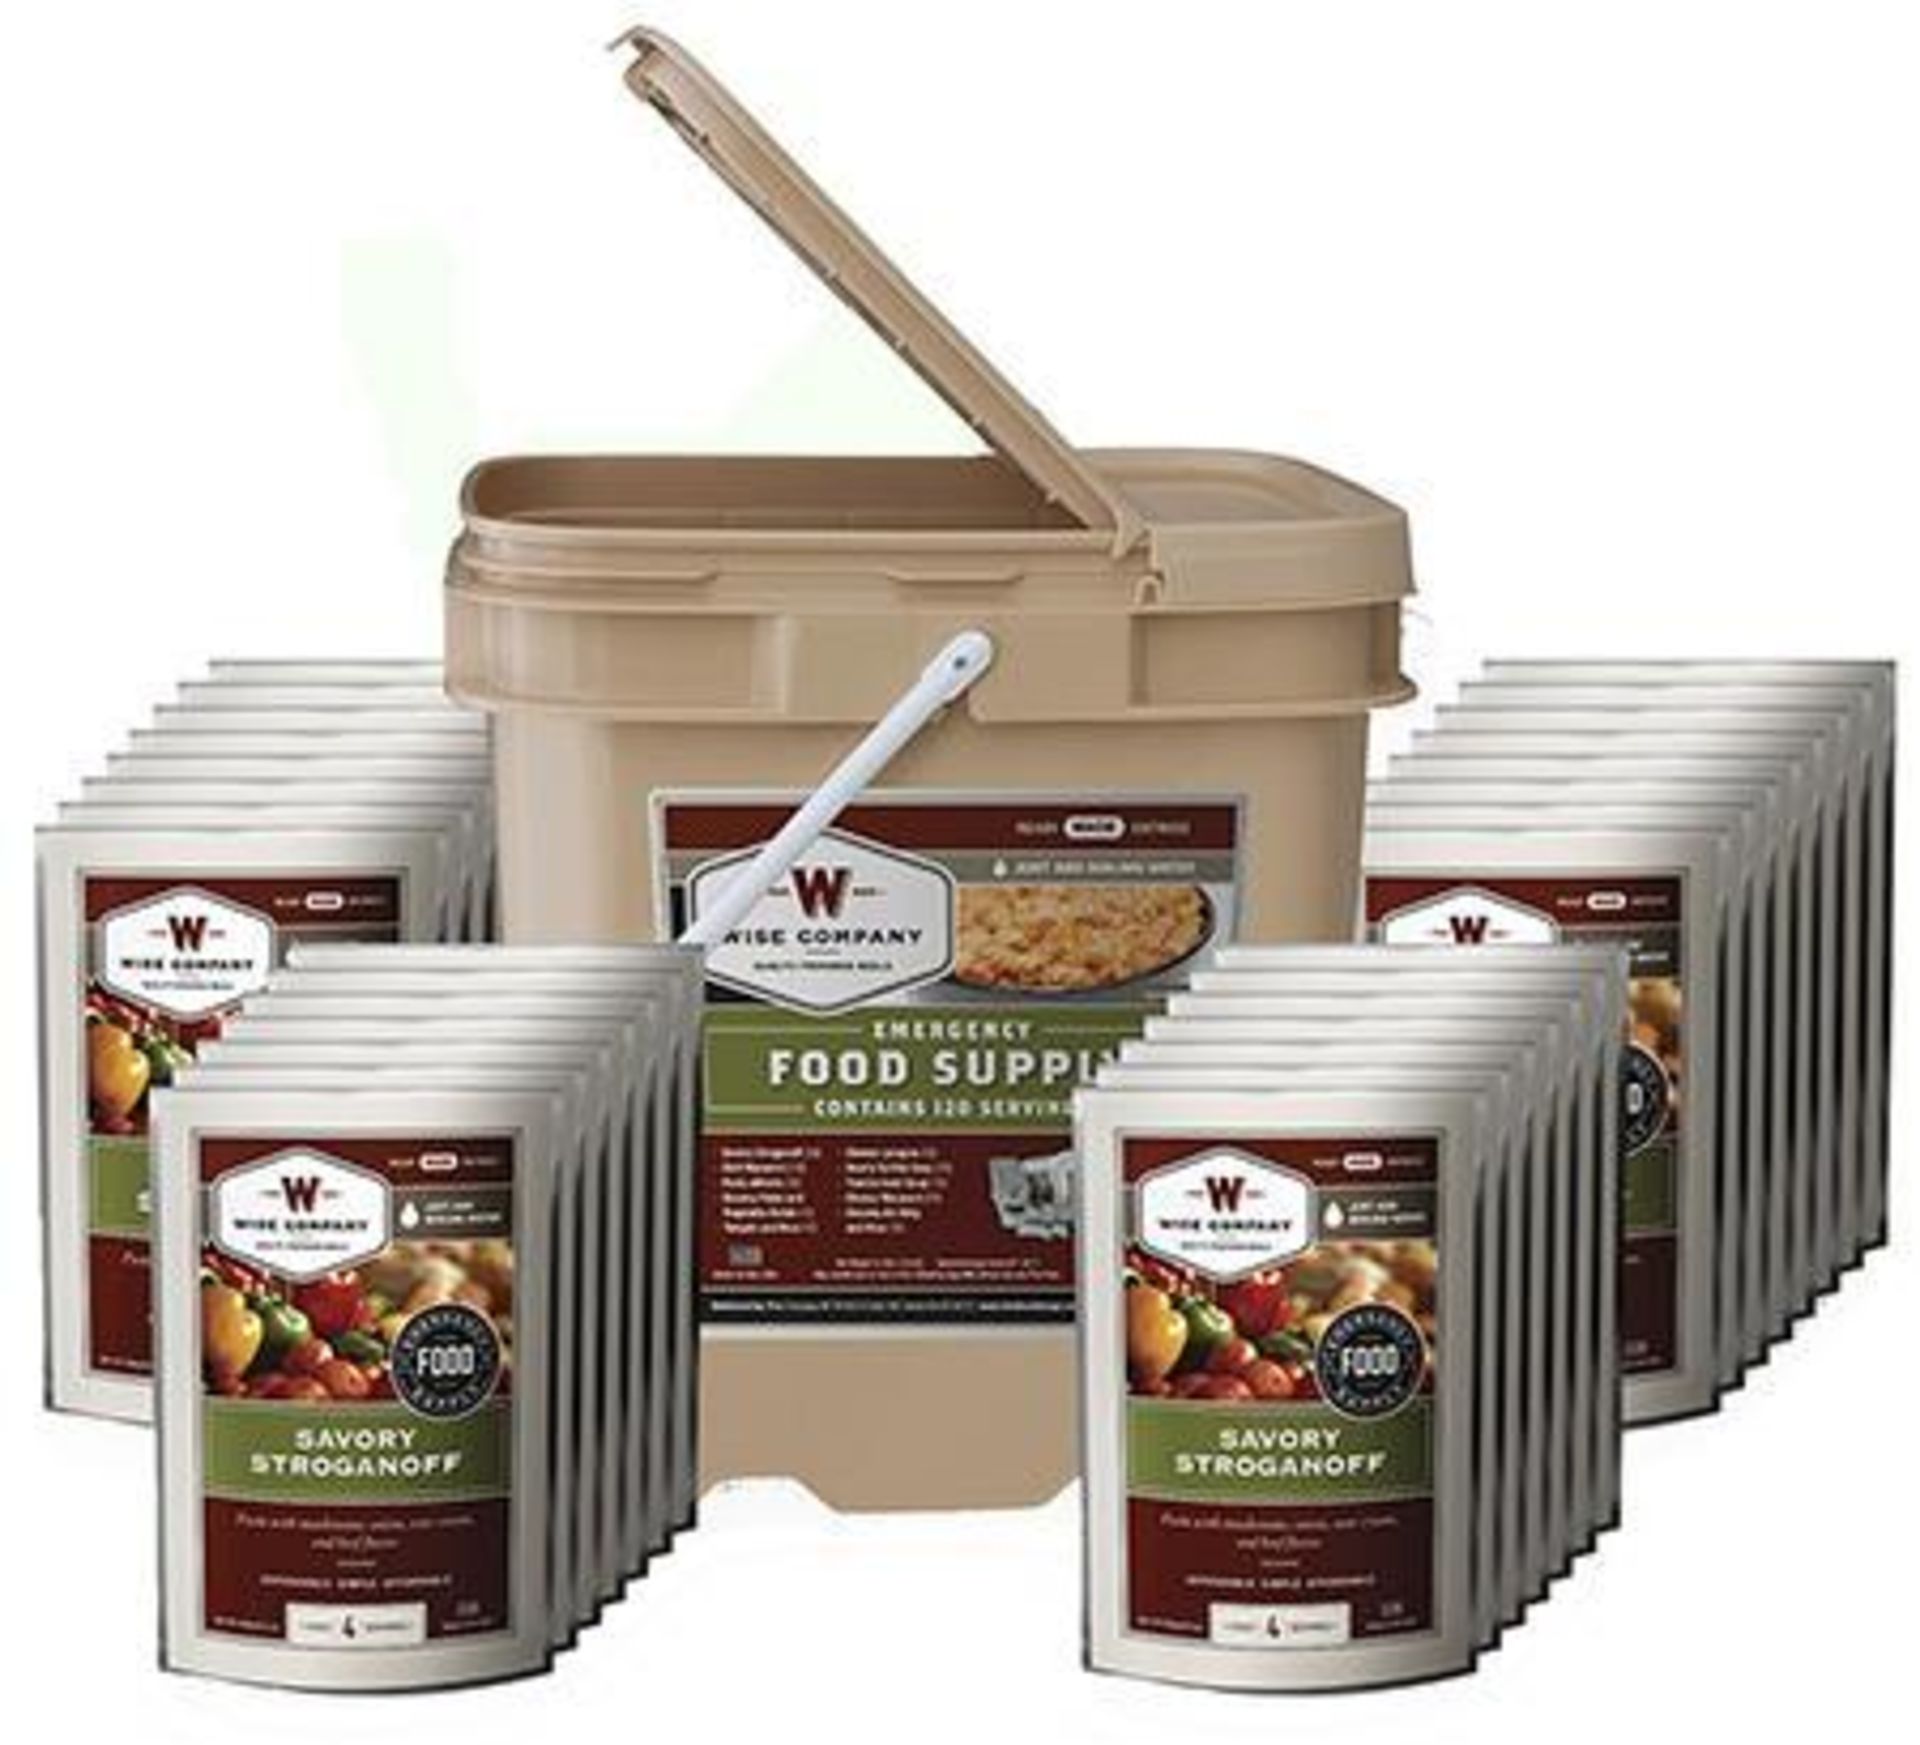 Type:Dehydrated/Freeze Dried Model or Style:Emergency Food Kit Size:120 Servings Material:Entrees